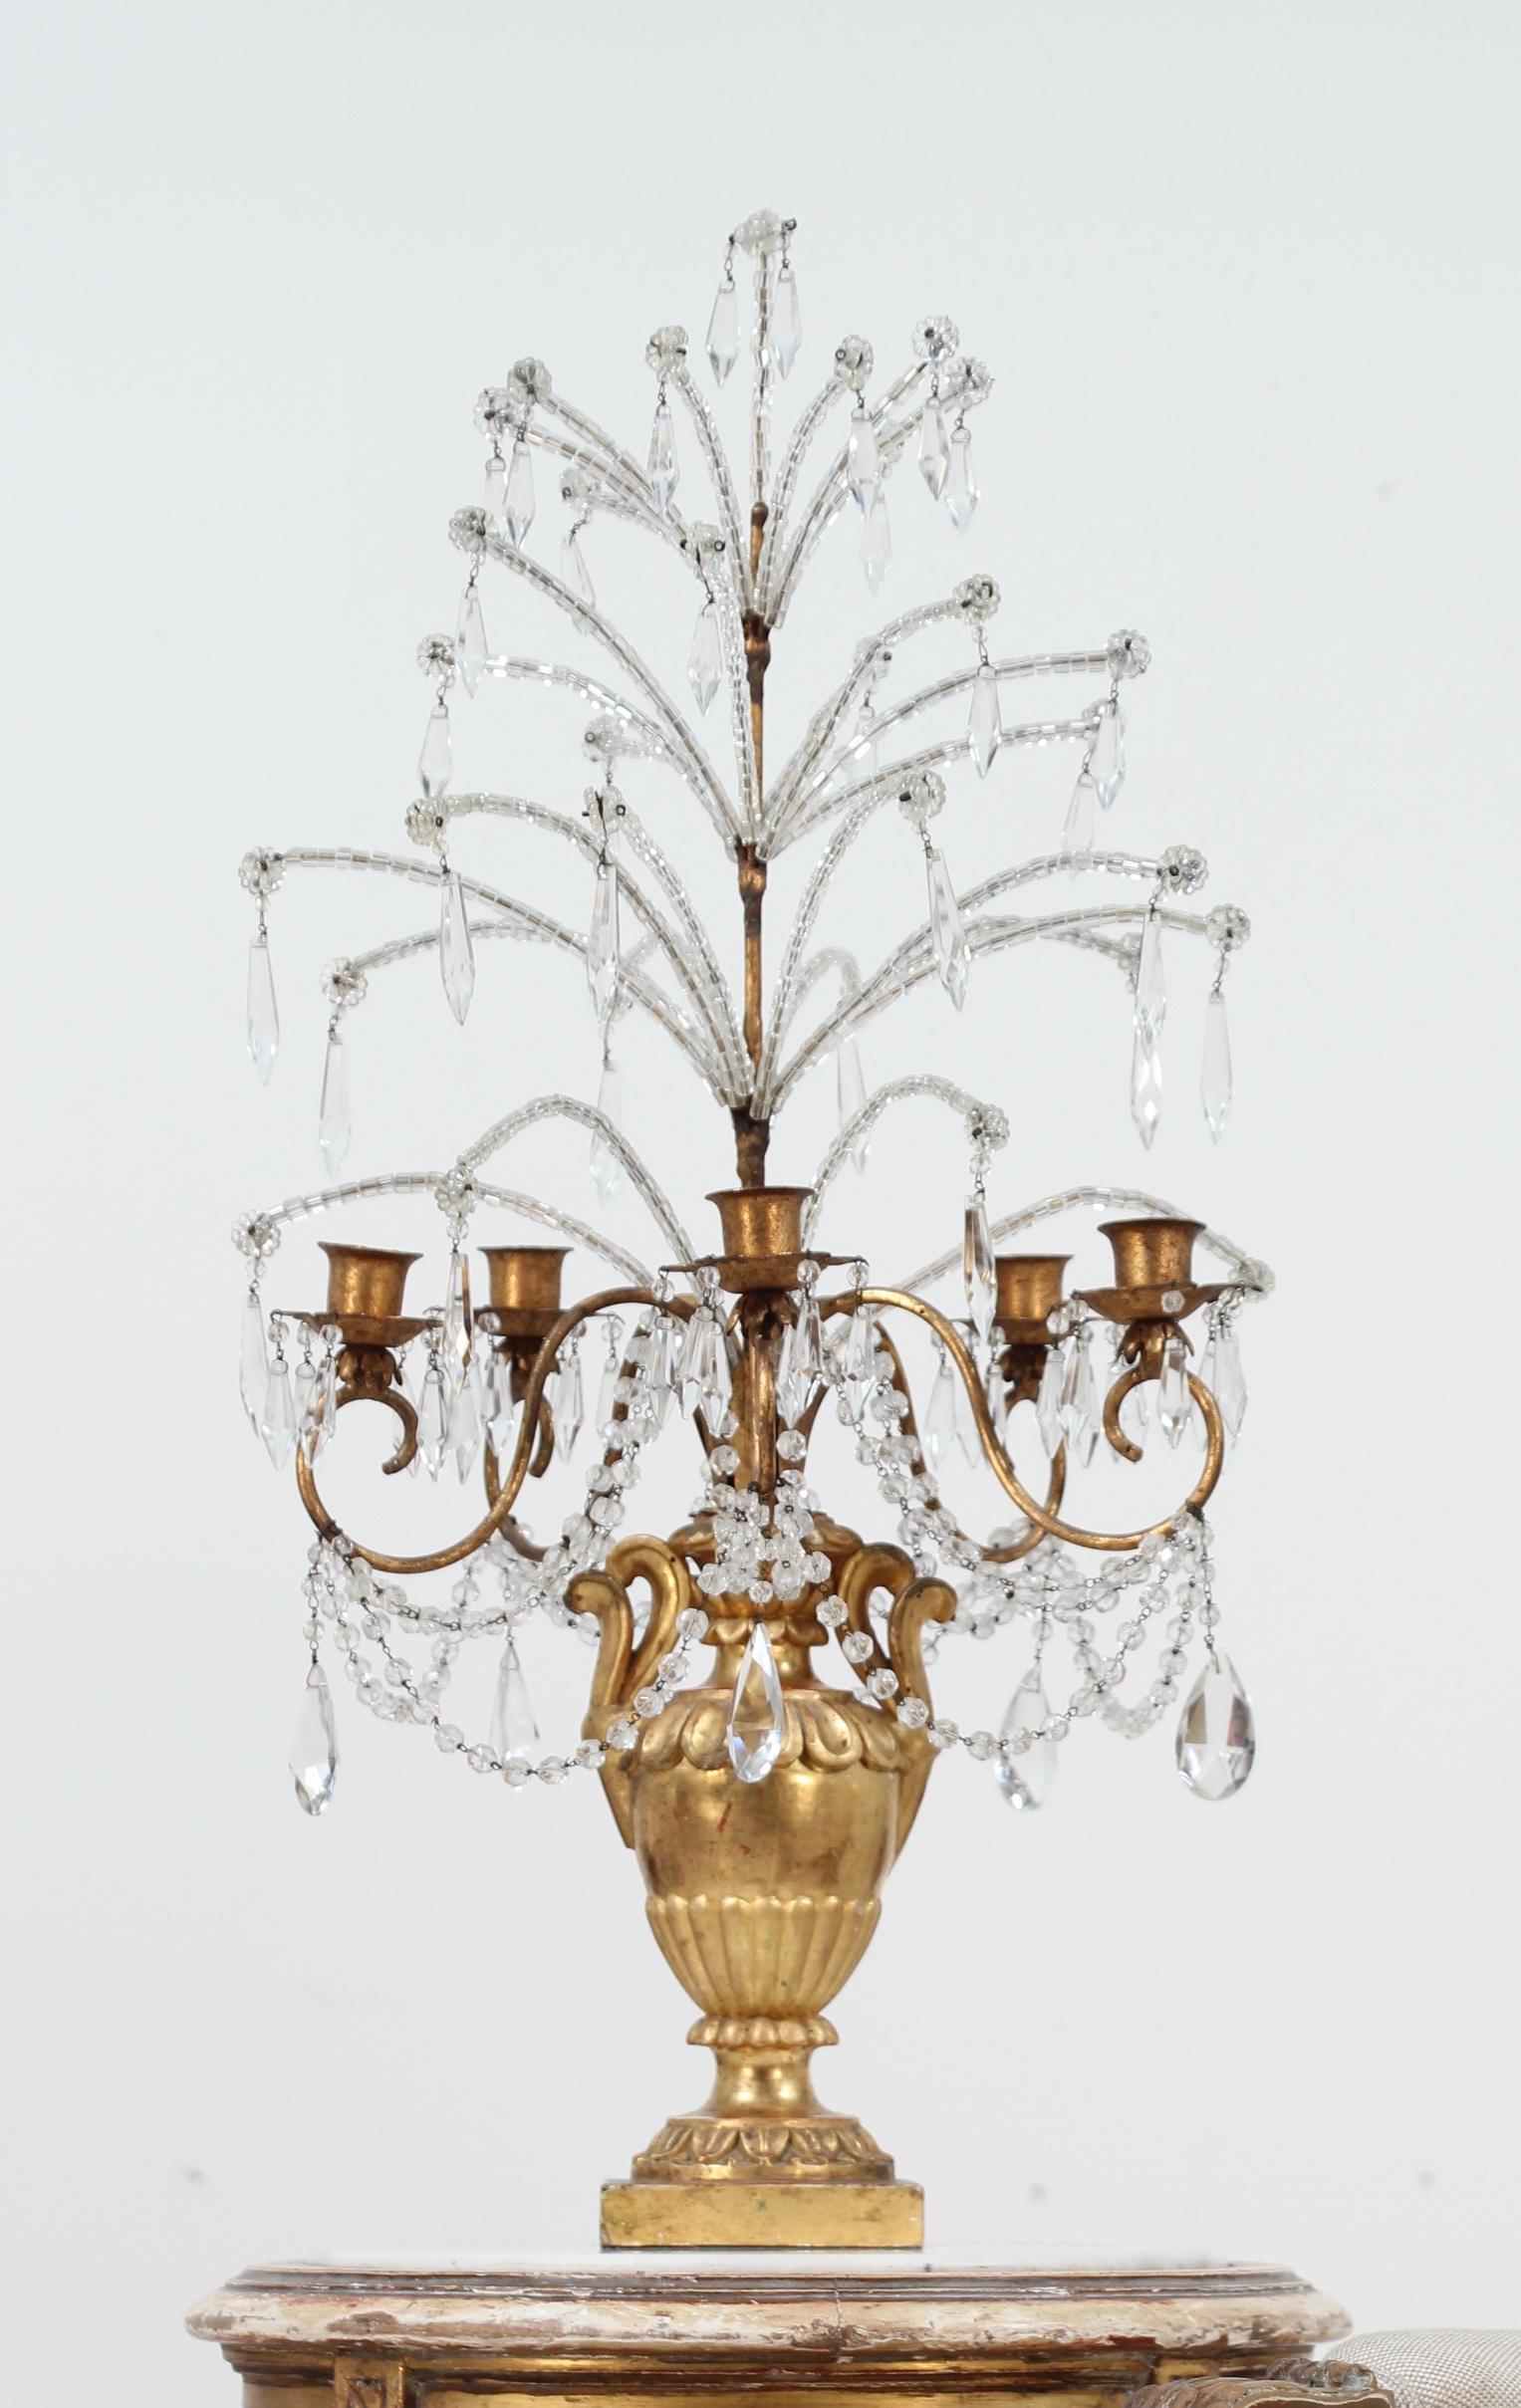 Glittering, early 20th century Italian carved gilt-wood, iron and crystal candelabra or girandole in the Baroque style.

This, beautifully made, girandole consists of a burst crystal beaded branches stemming from a gilt iron frame which is mounted